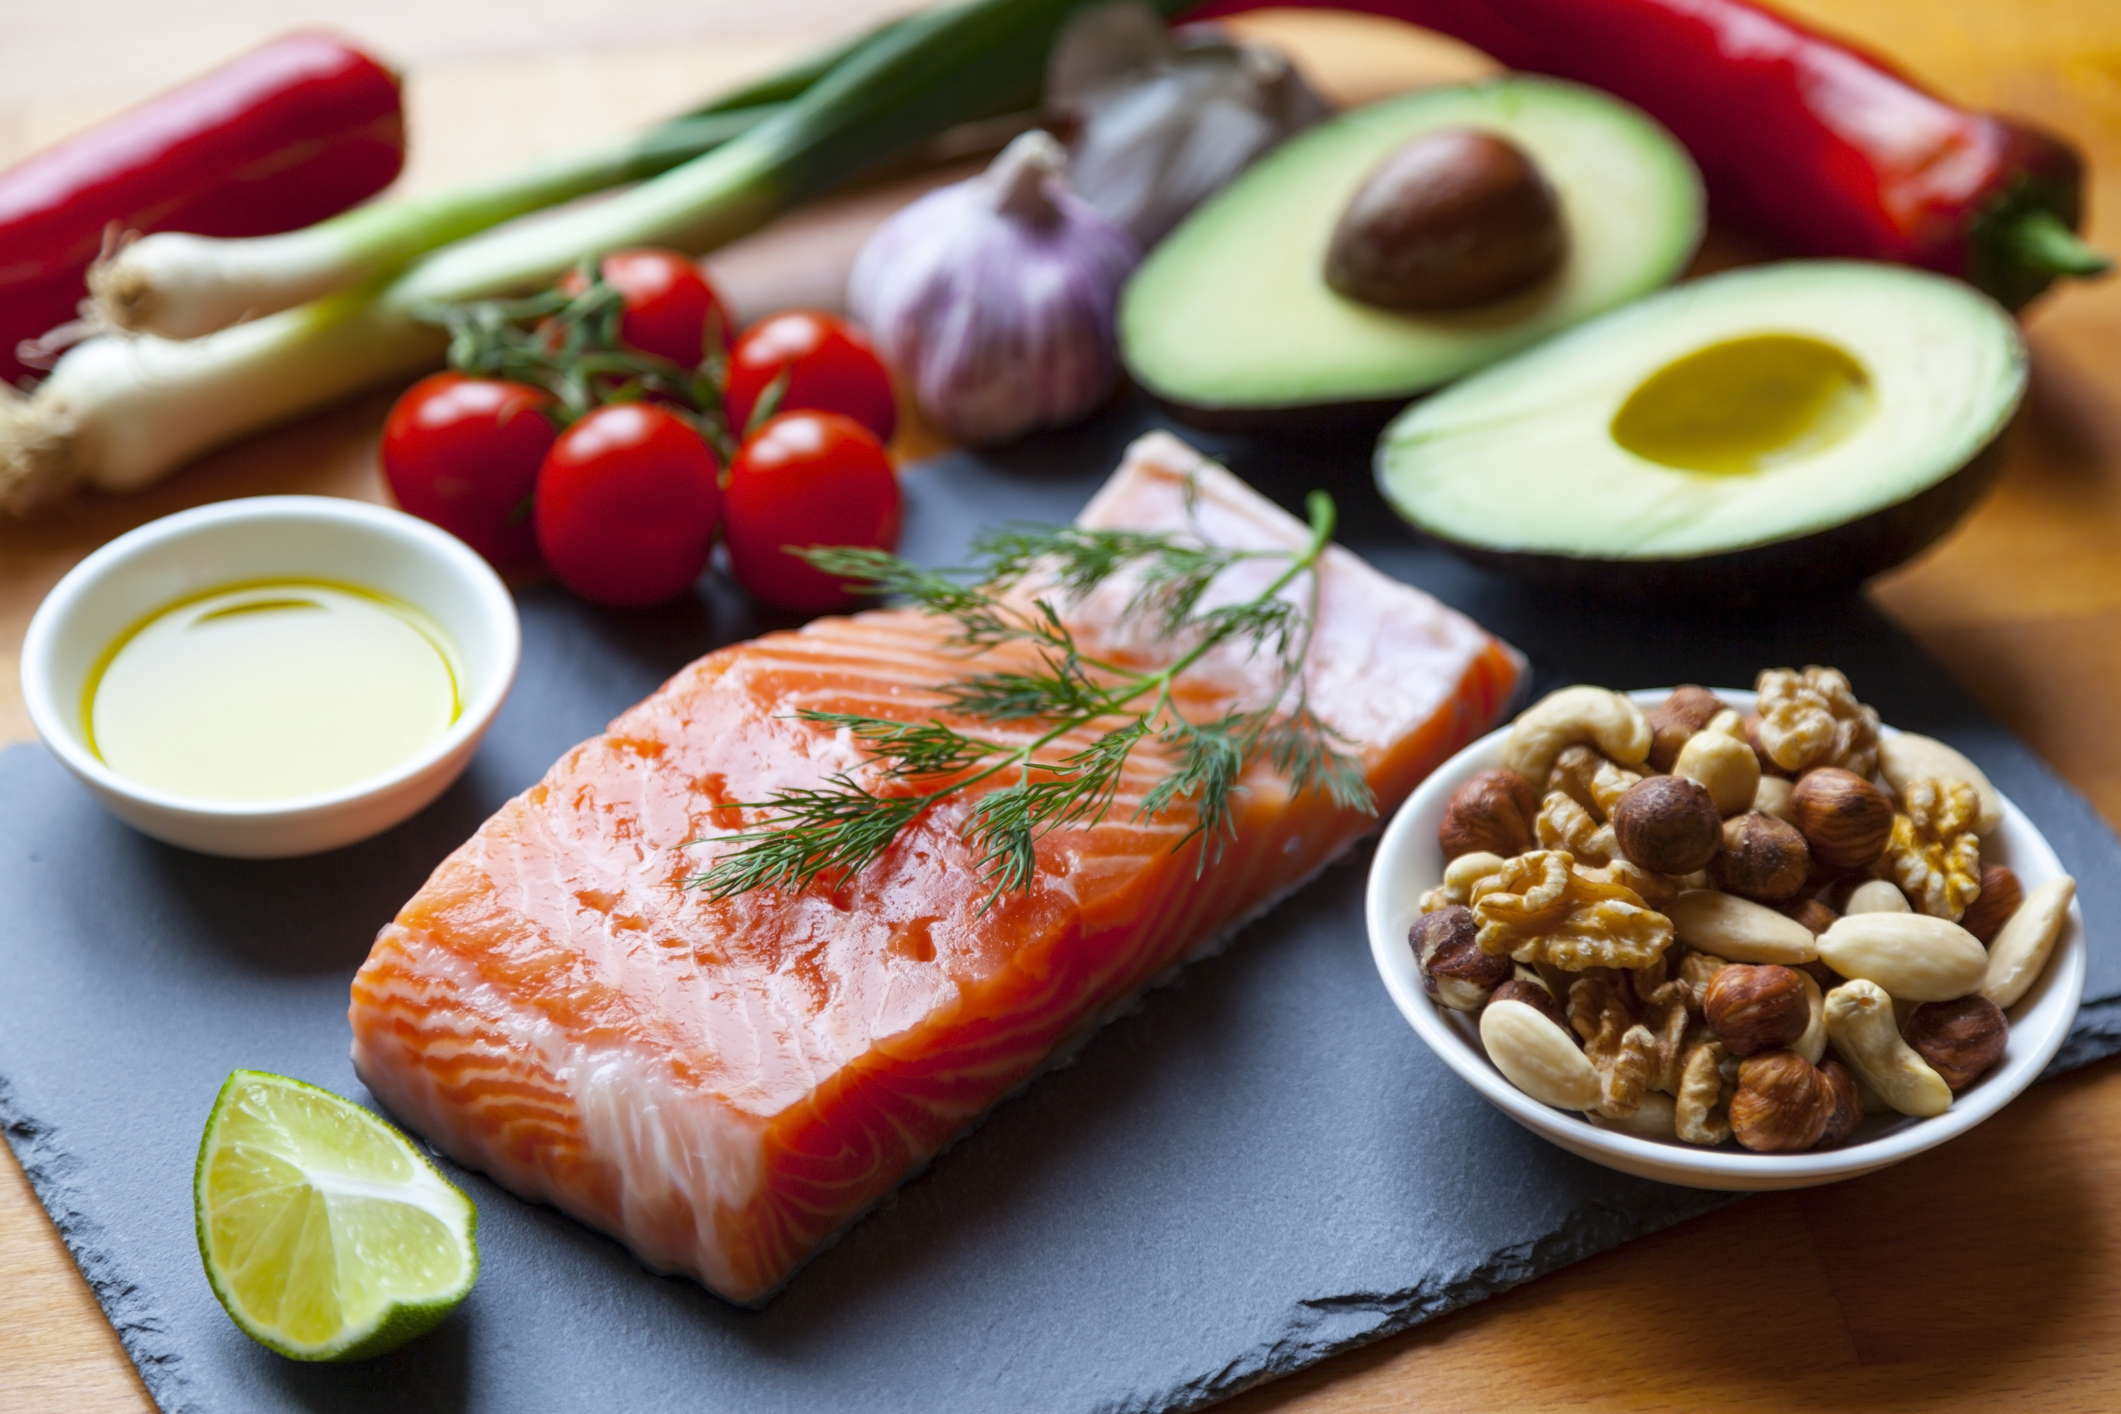 Diet may help preserve cognitive function